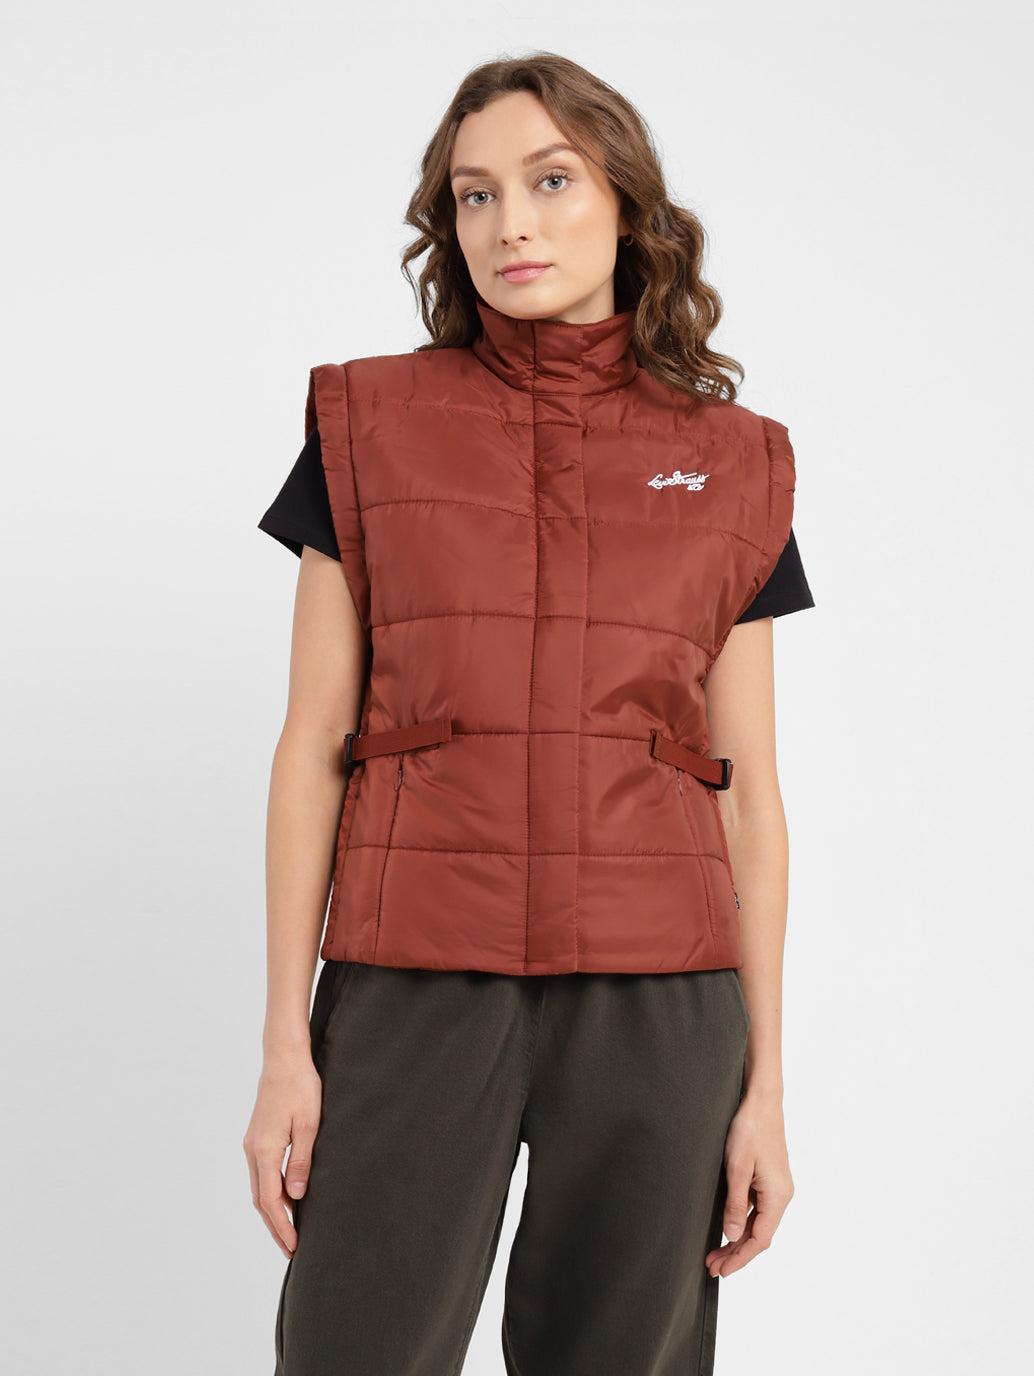 women's-solid-high-neck-jackets